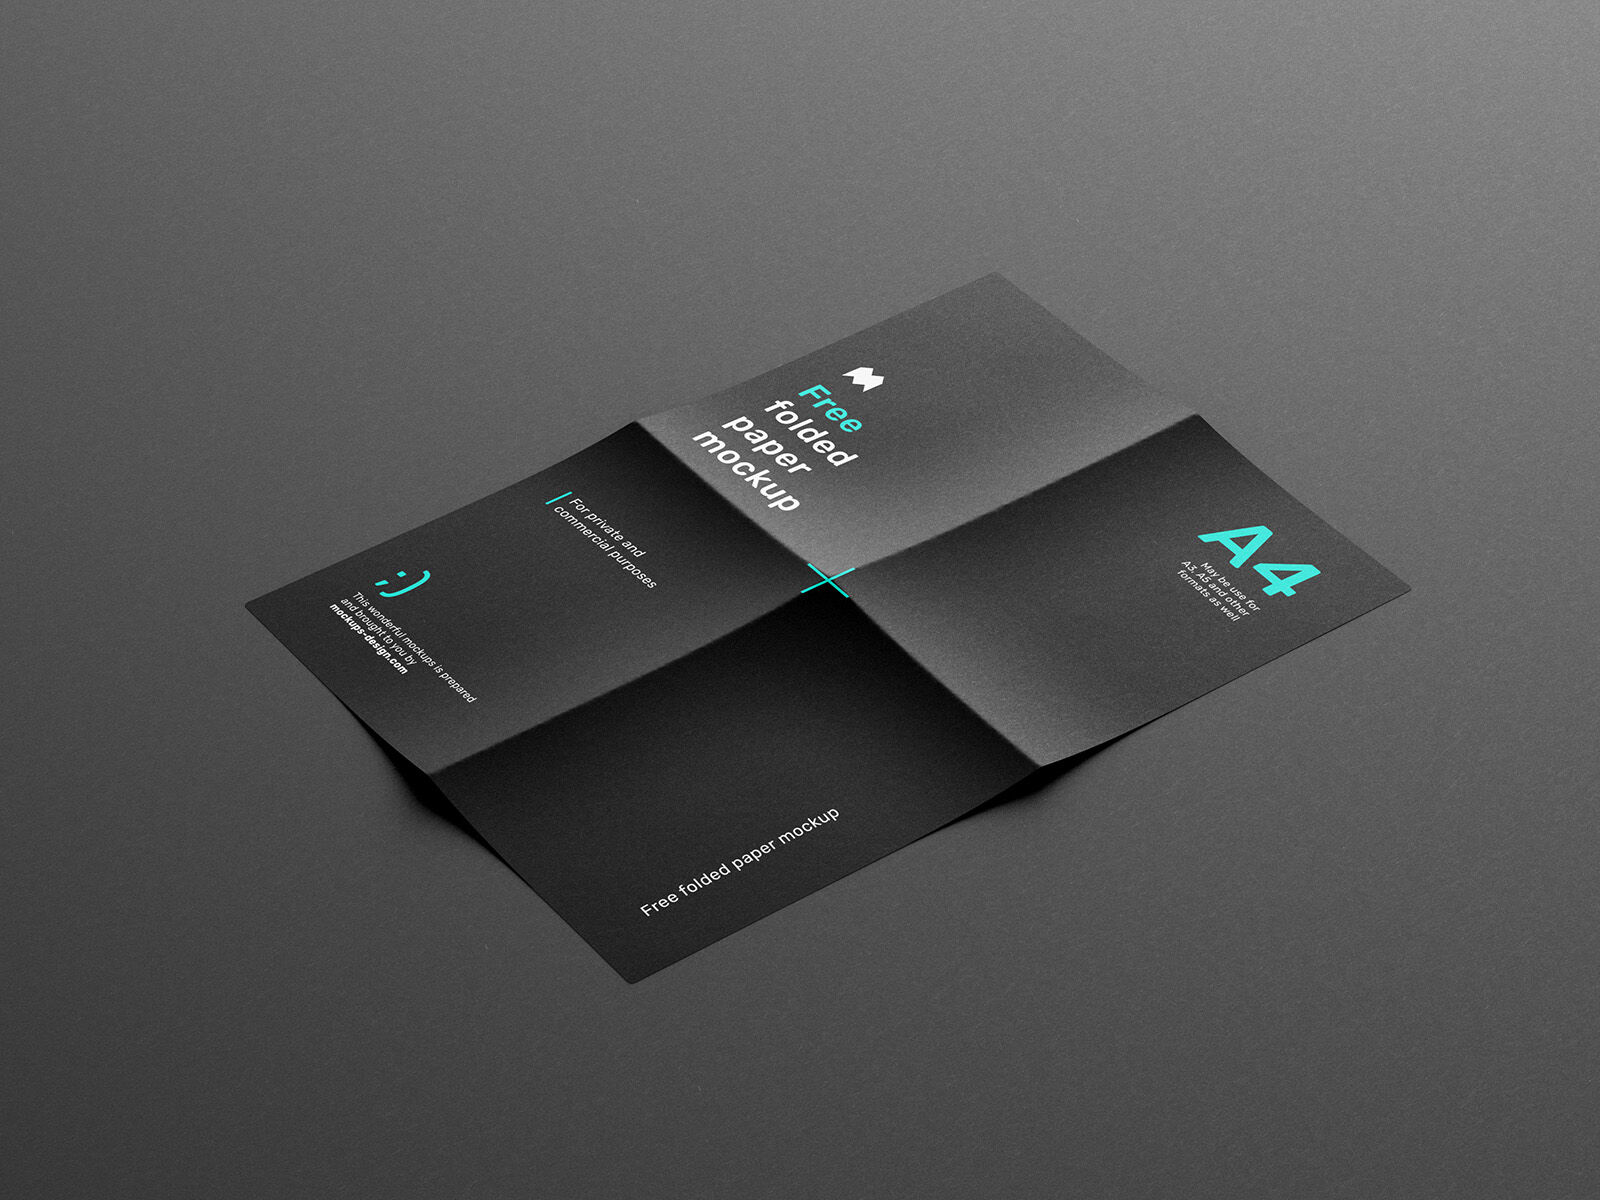 6 Different A4 Folded Paper Mockups with a Dark Theme FREE PSD